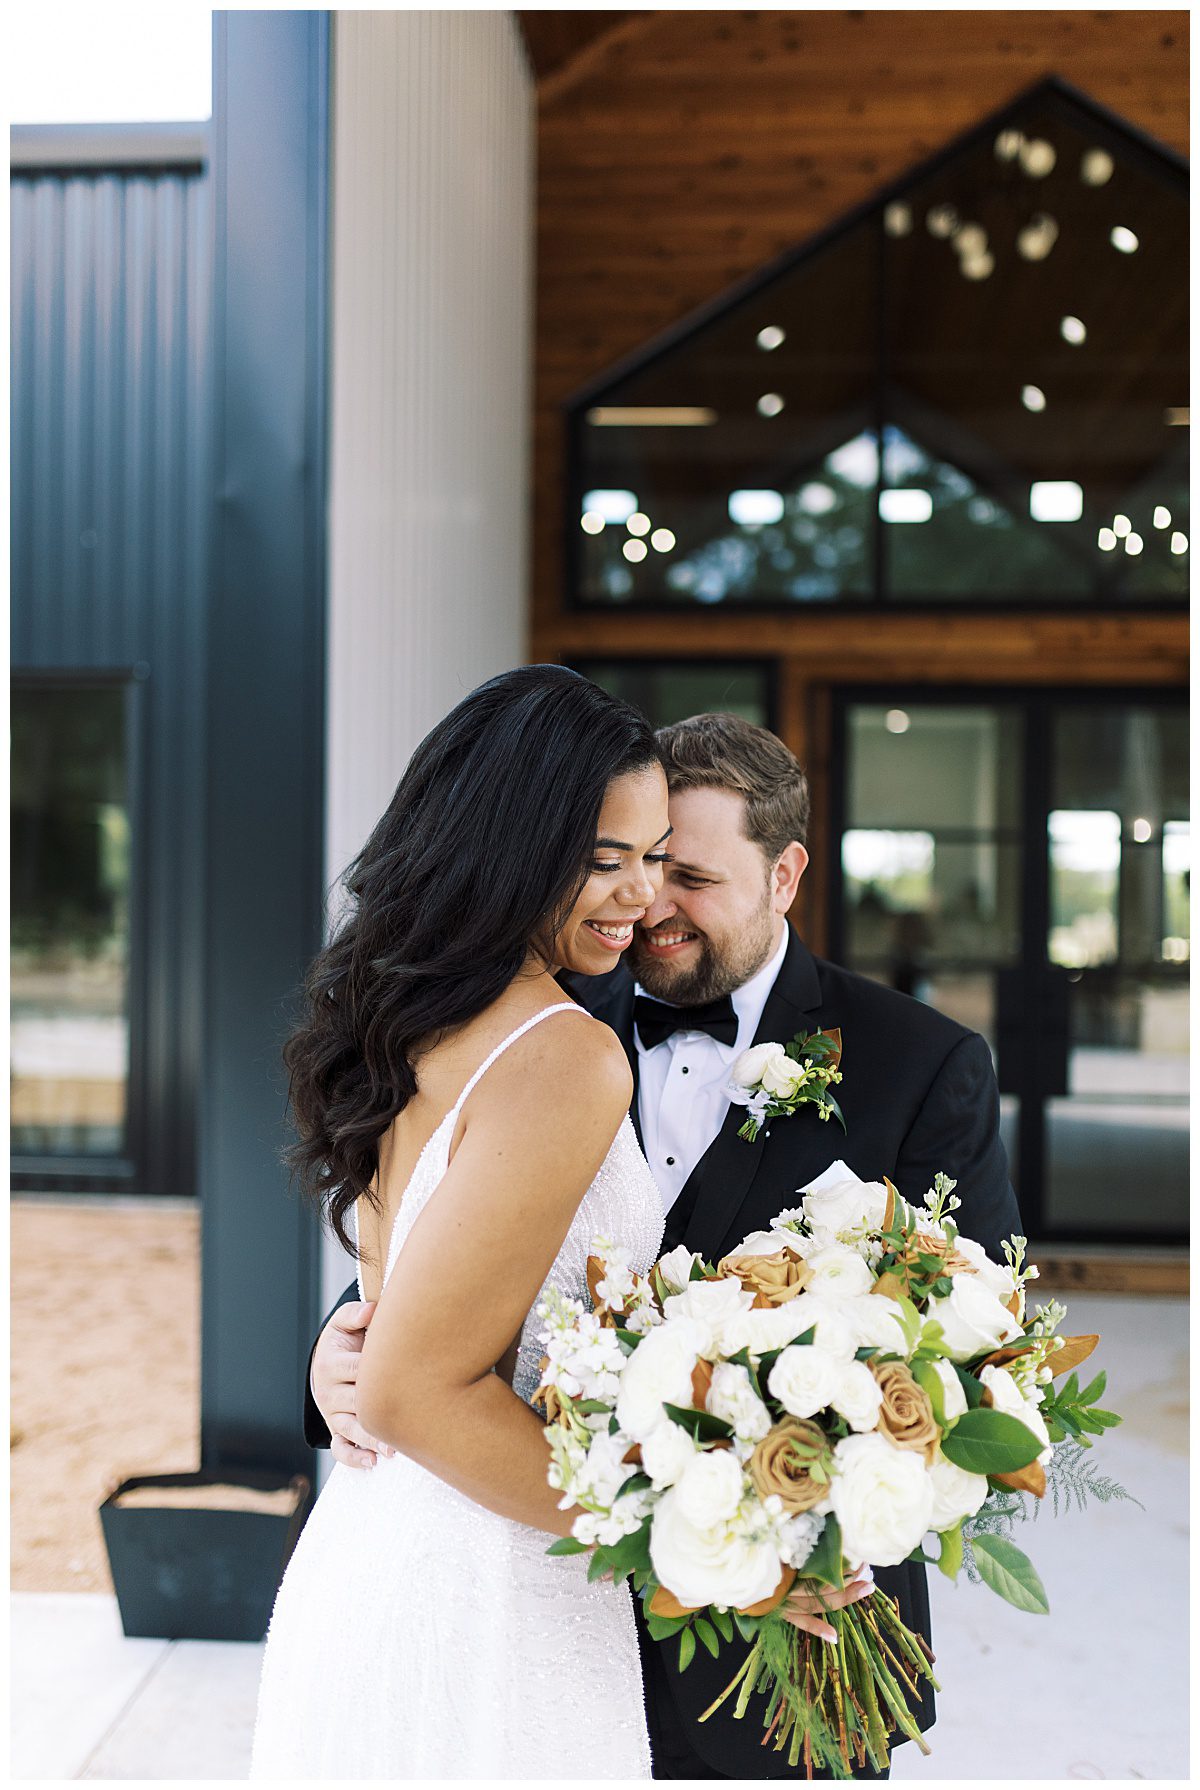 Modern Wedding at The Union House in DFW, Texas.